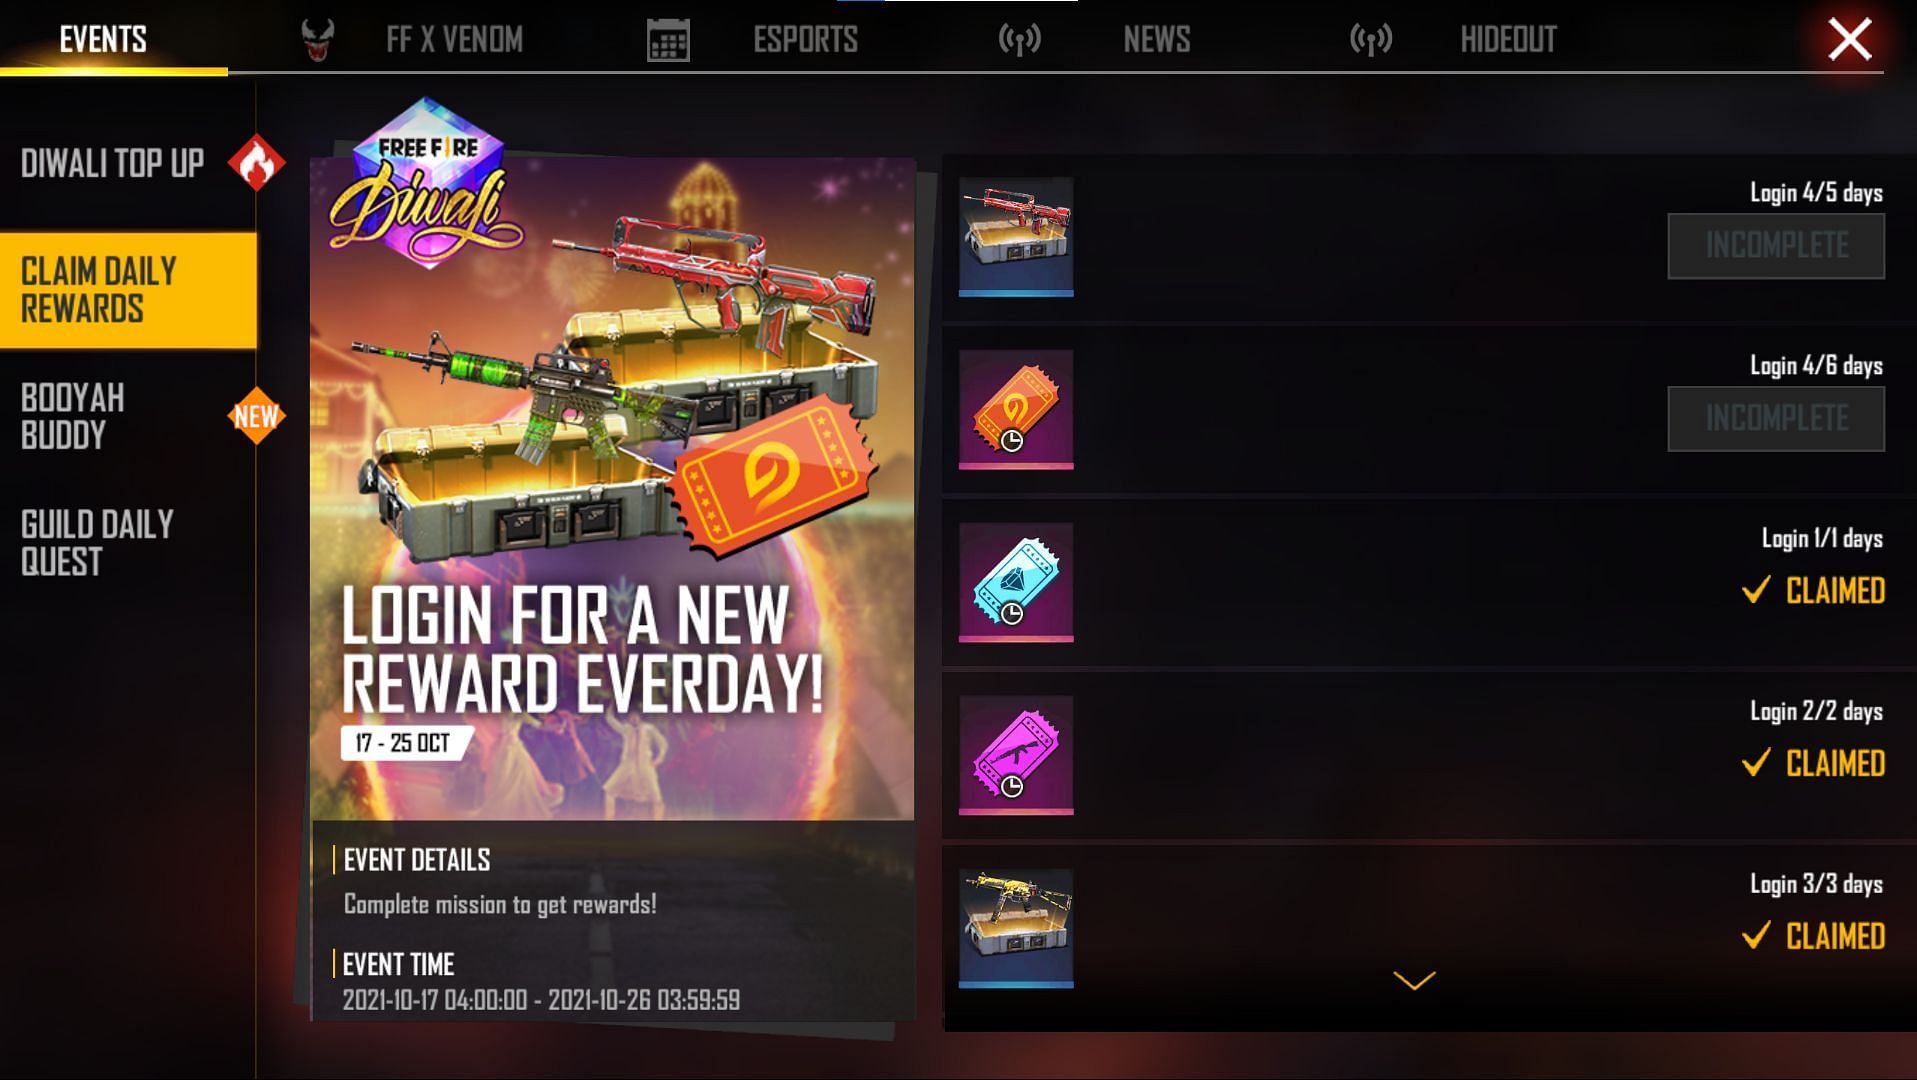 The Daily Rewards section (Image via Free Fire)